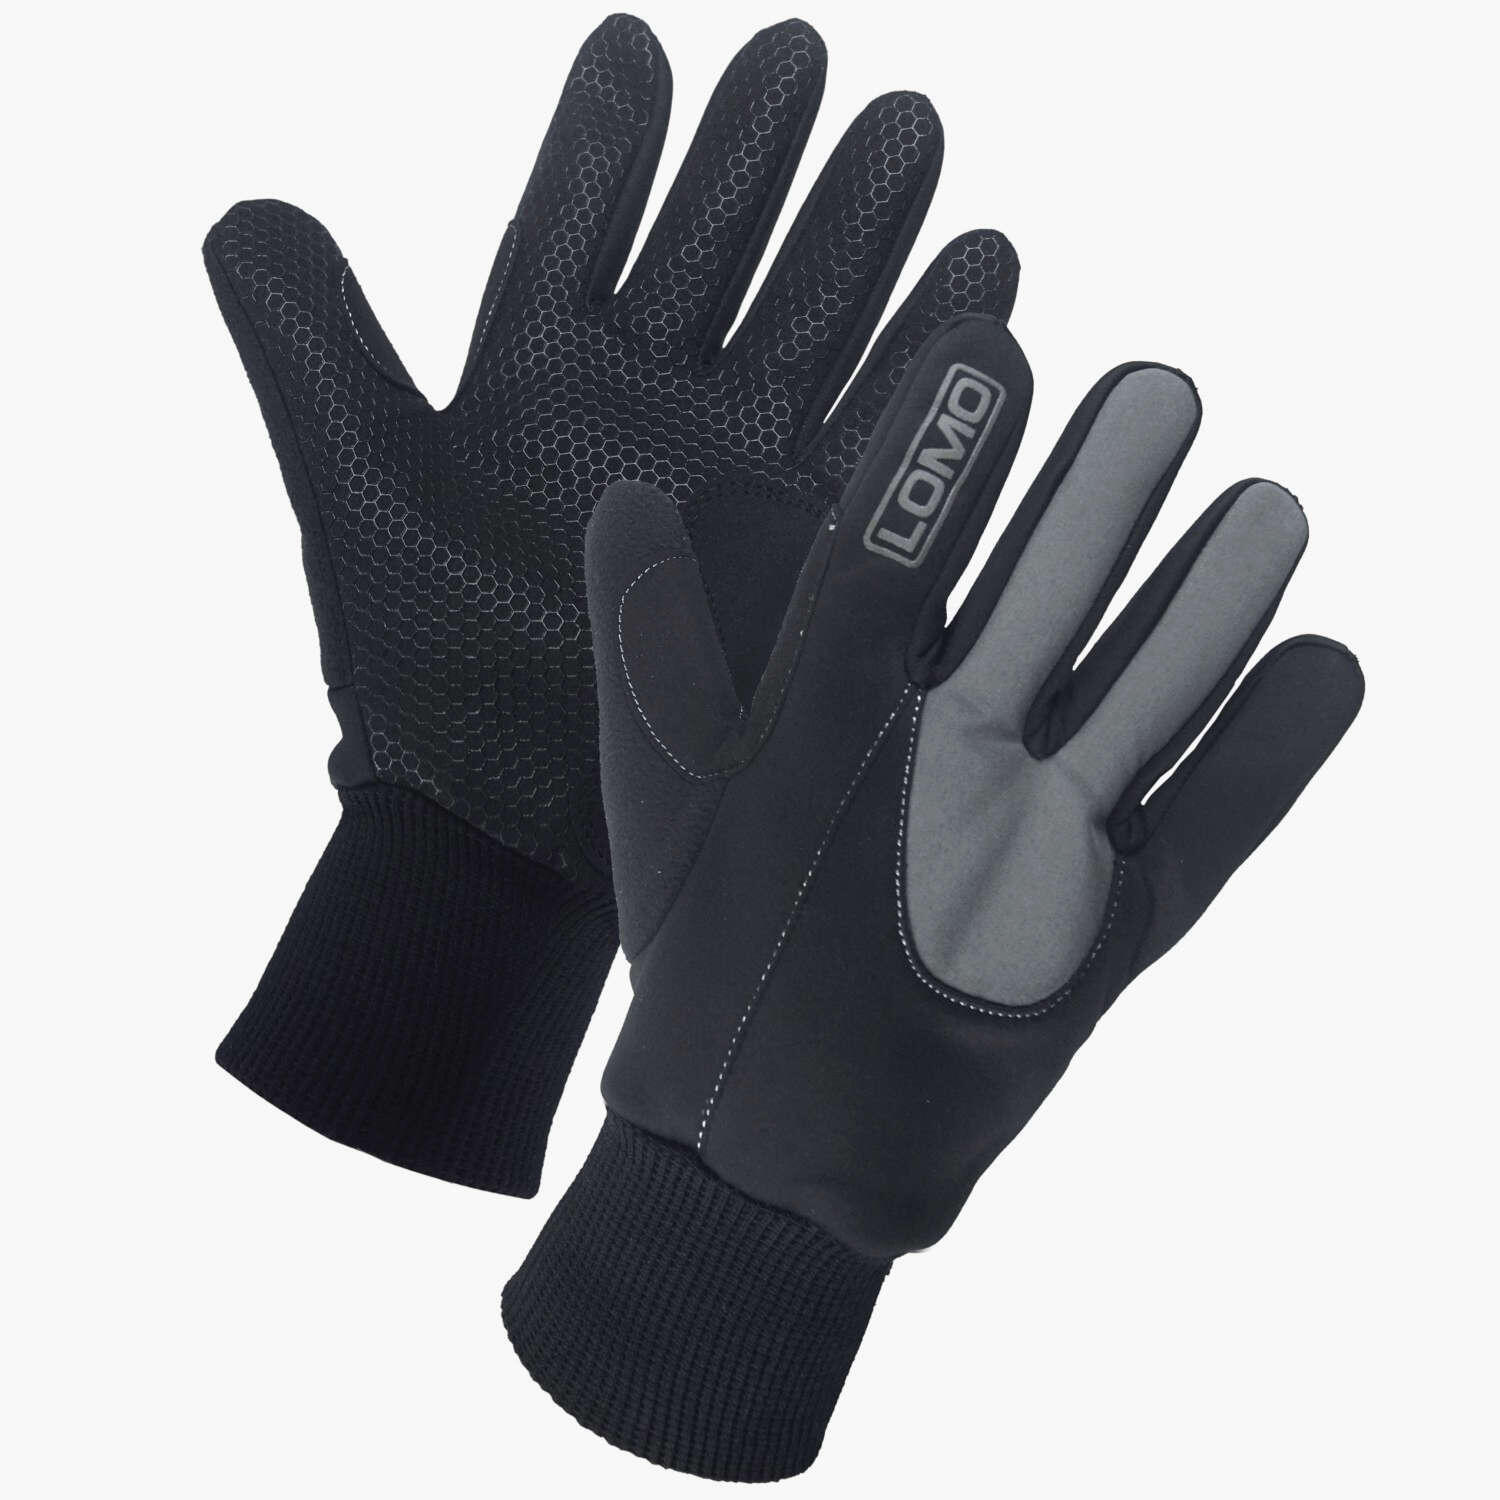 Lomo Winter Cycling Gloves 4/7